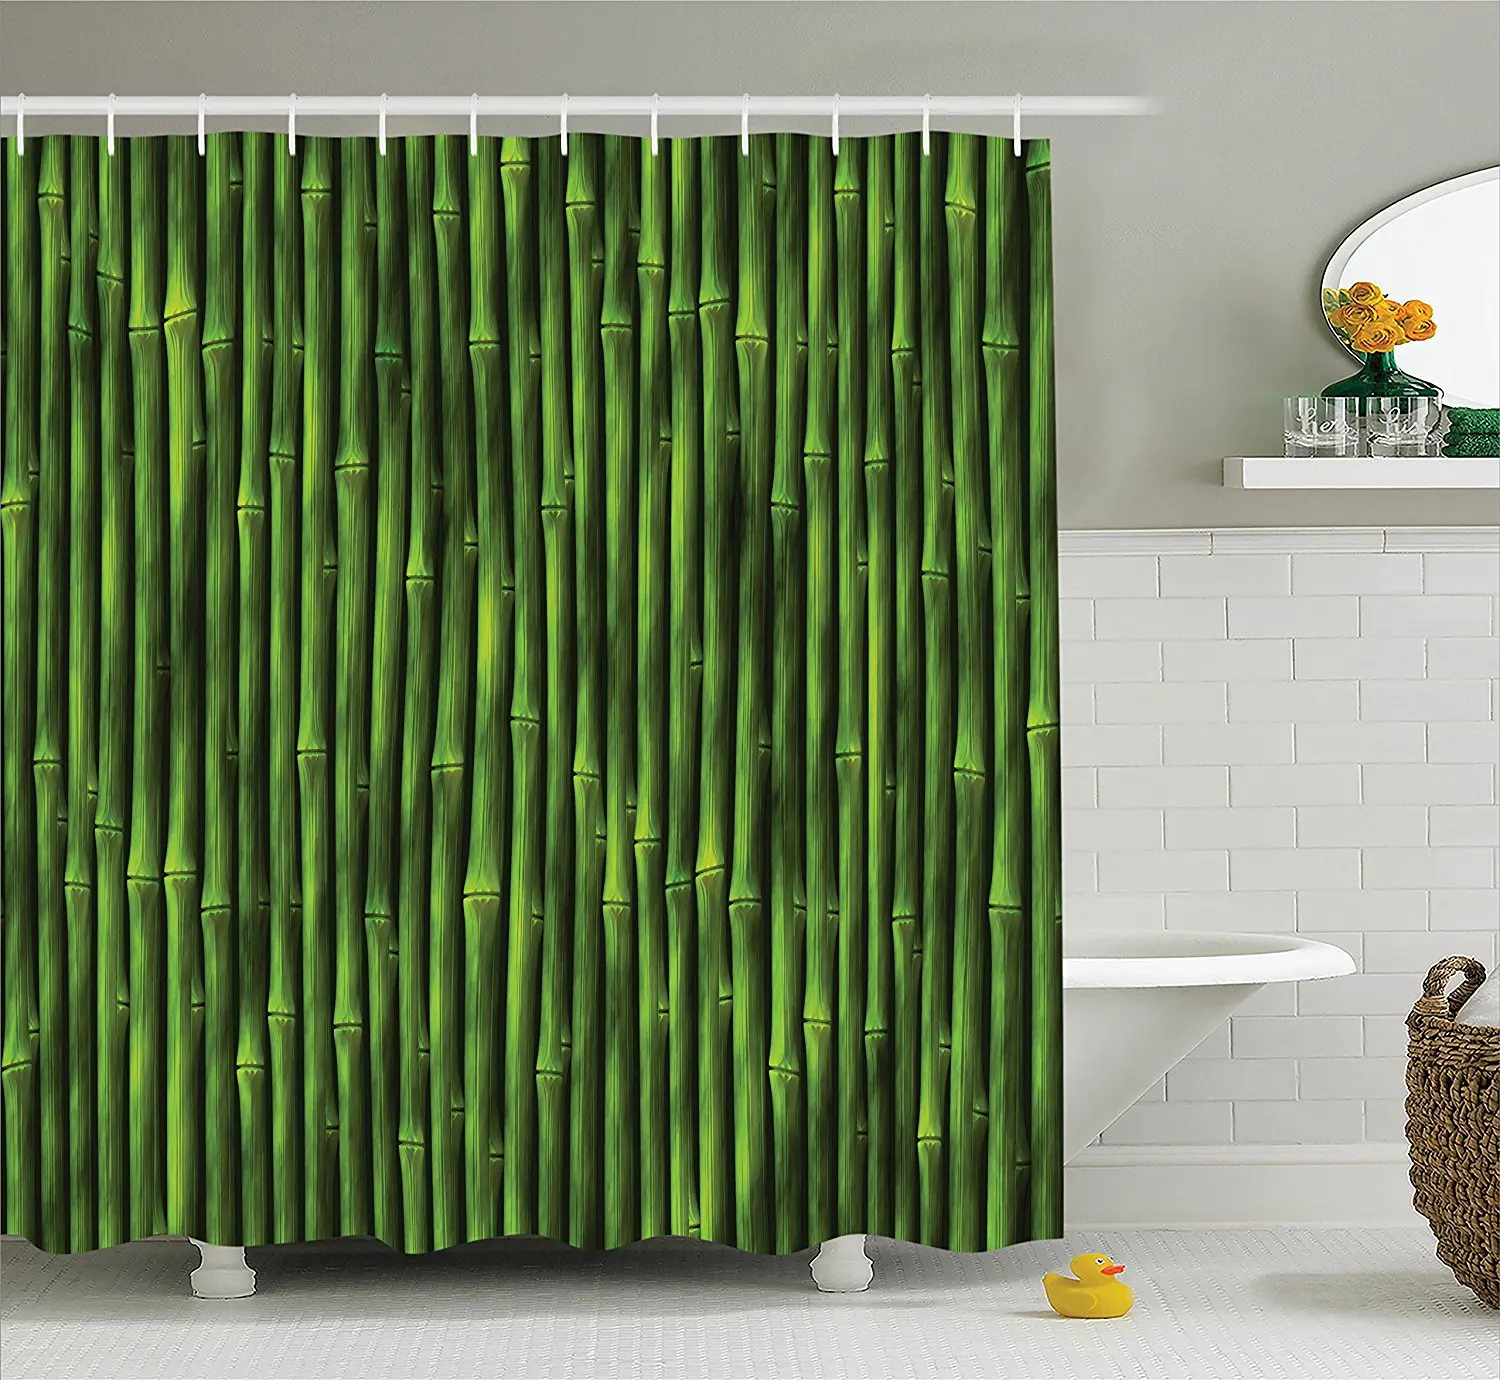 Buy Ambesonne Bamboo Shower Curtain by, Bamboo Stems Pattern Tropical